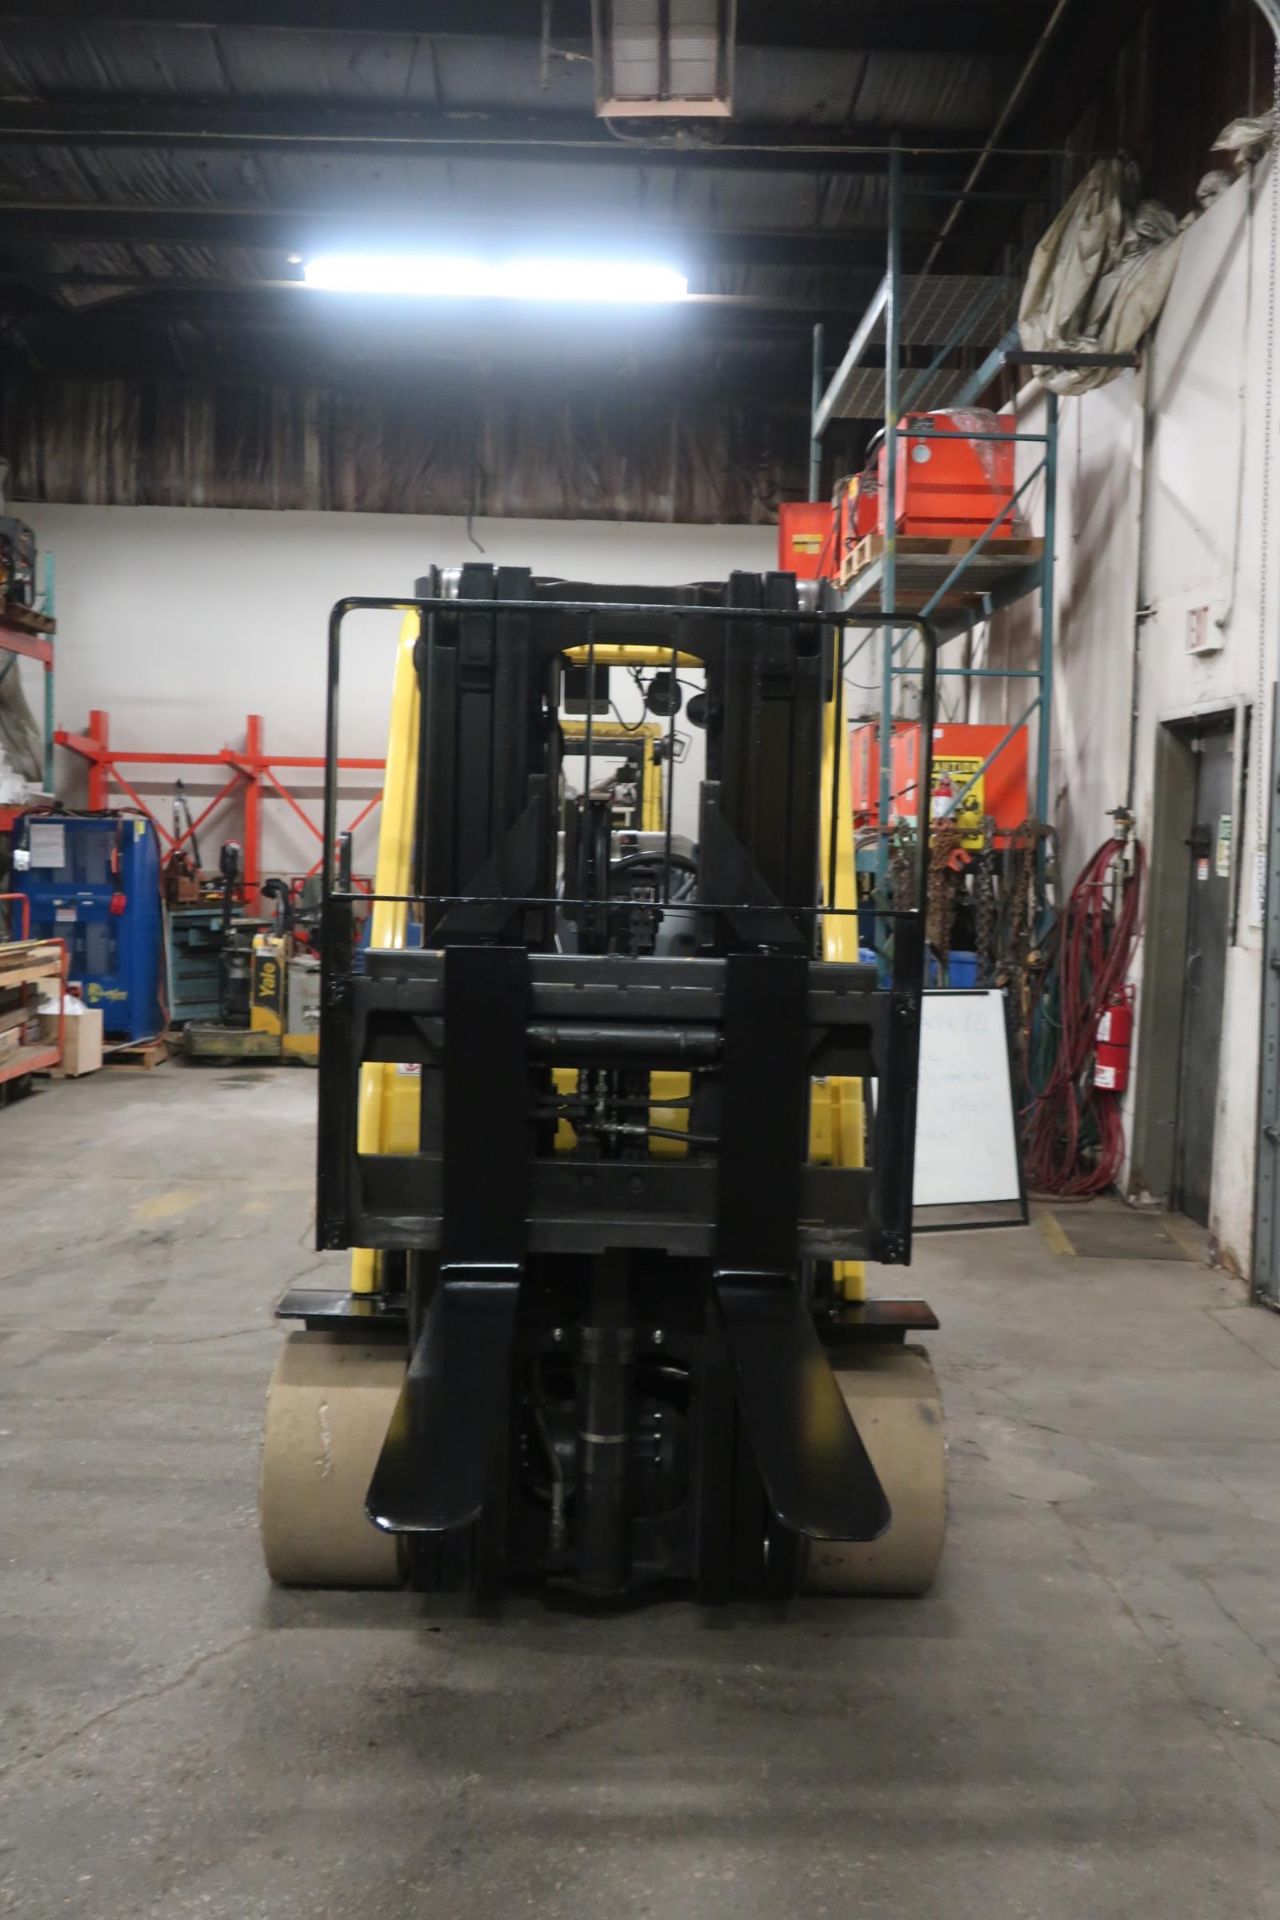 FREE CUSTOMS - 2016 Hyster 10000lbs Capacity Forklift with 3-stage mast - LPG (propane) with - Image 2 of 2